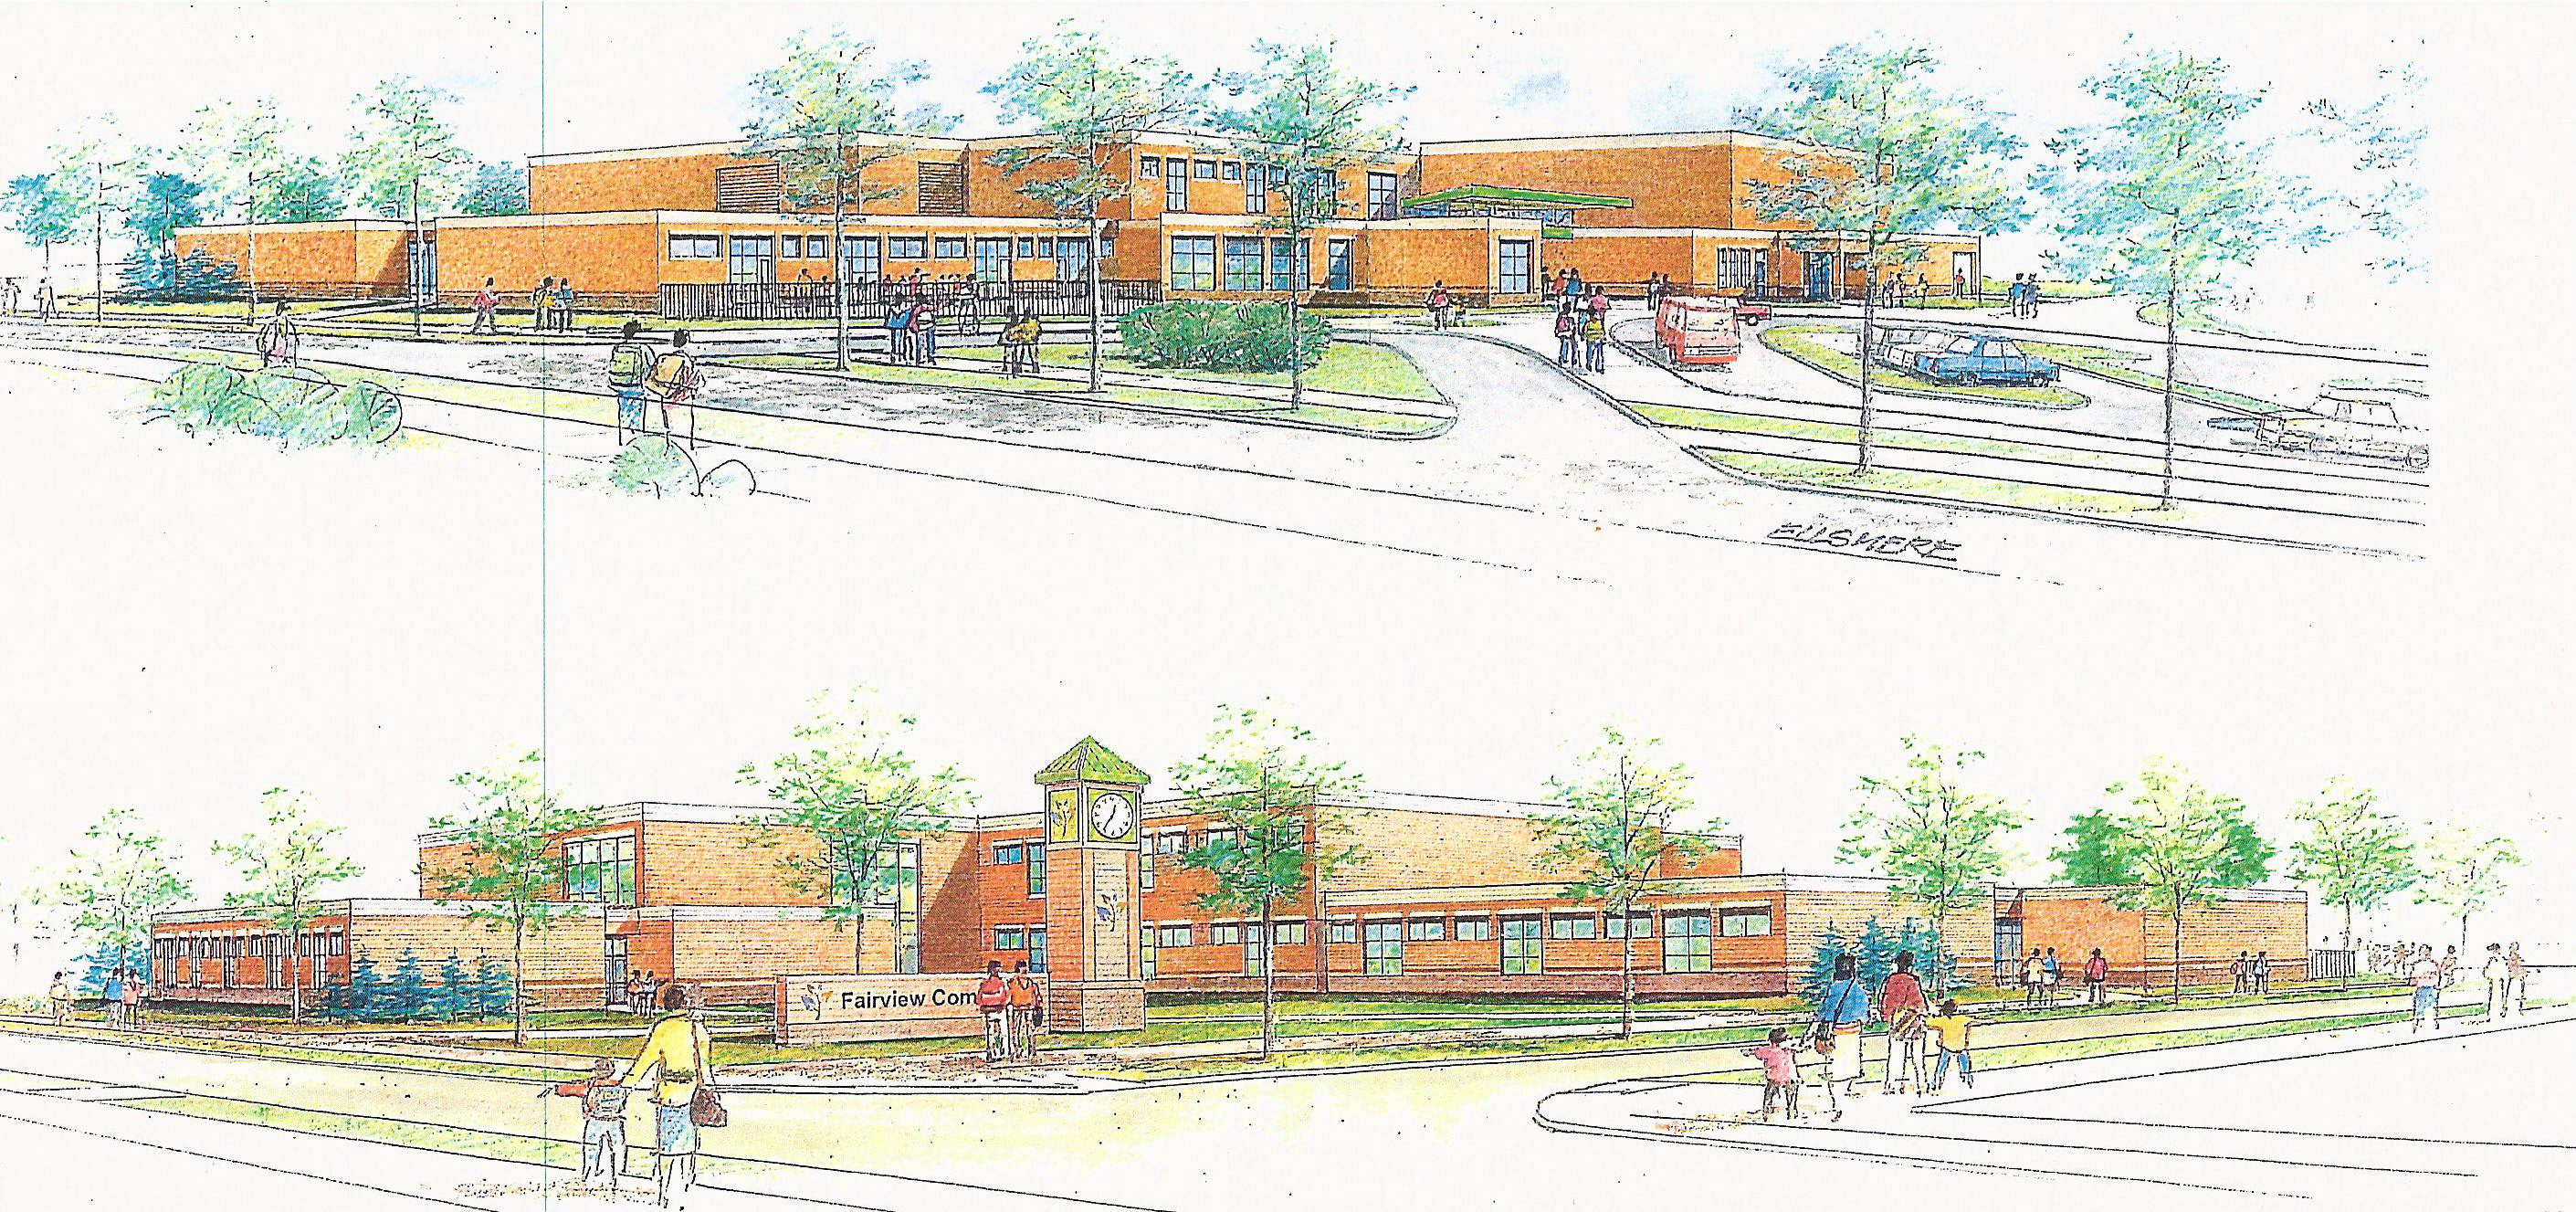 The new Fairview Commons PK-8 grade school located at Hillcrest and Elsmere. (rendering by R.P. Madison International Inc.)